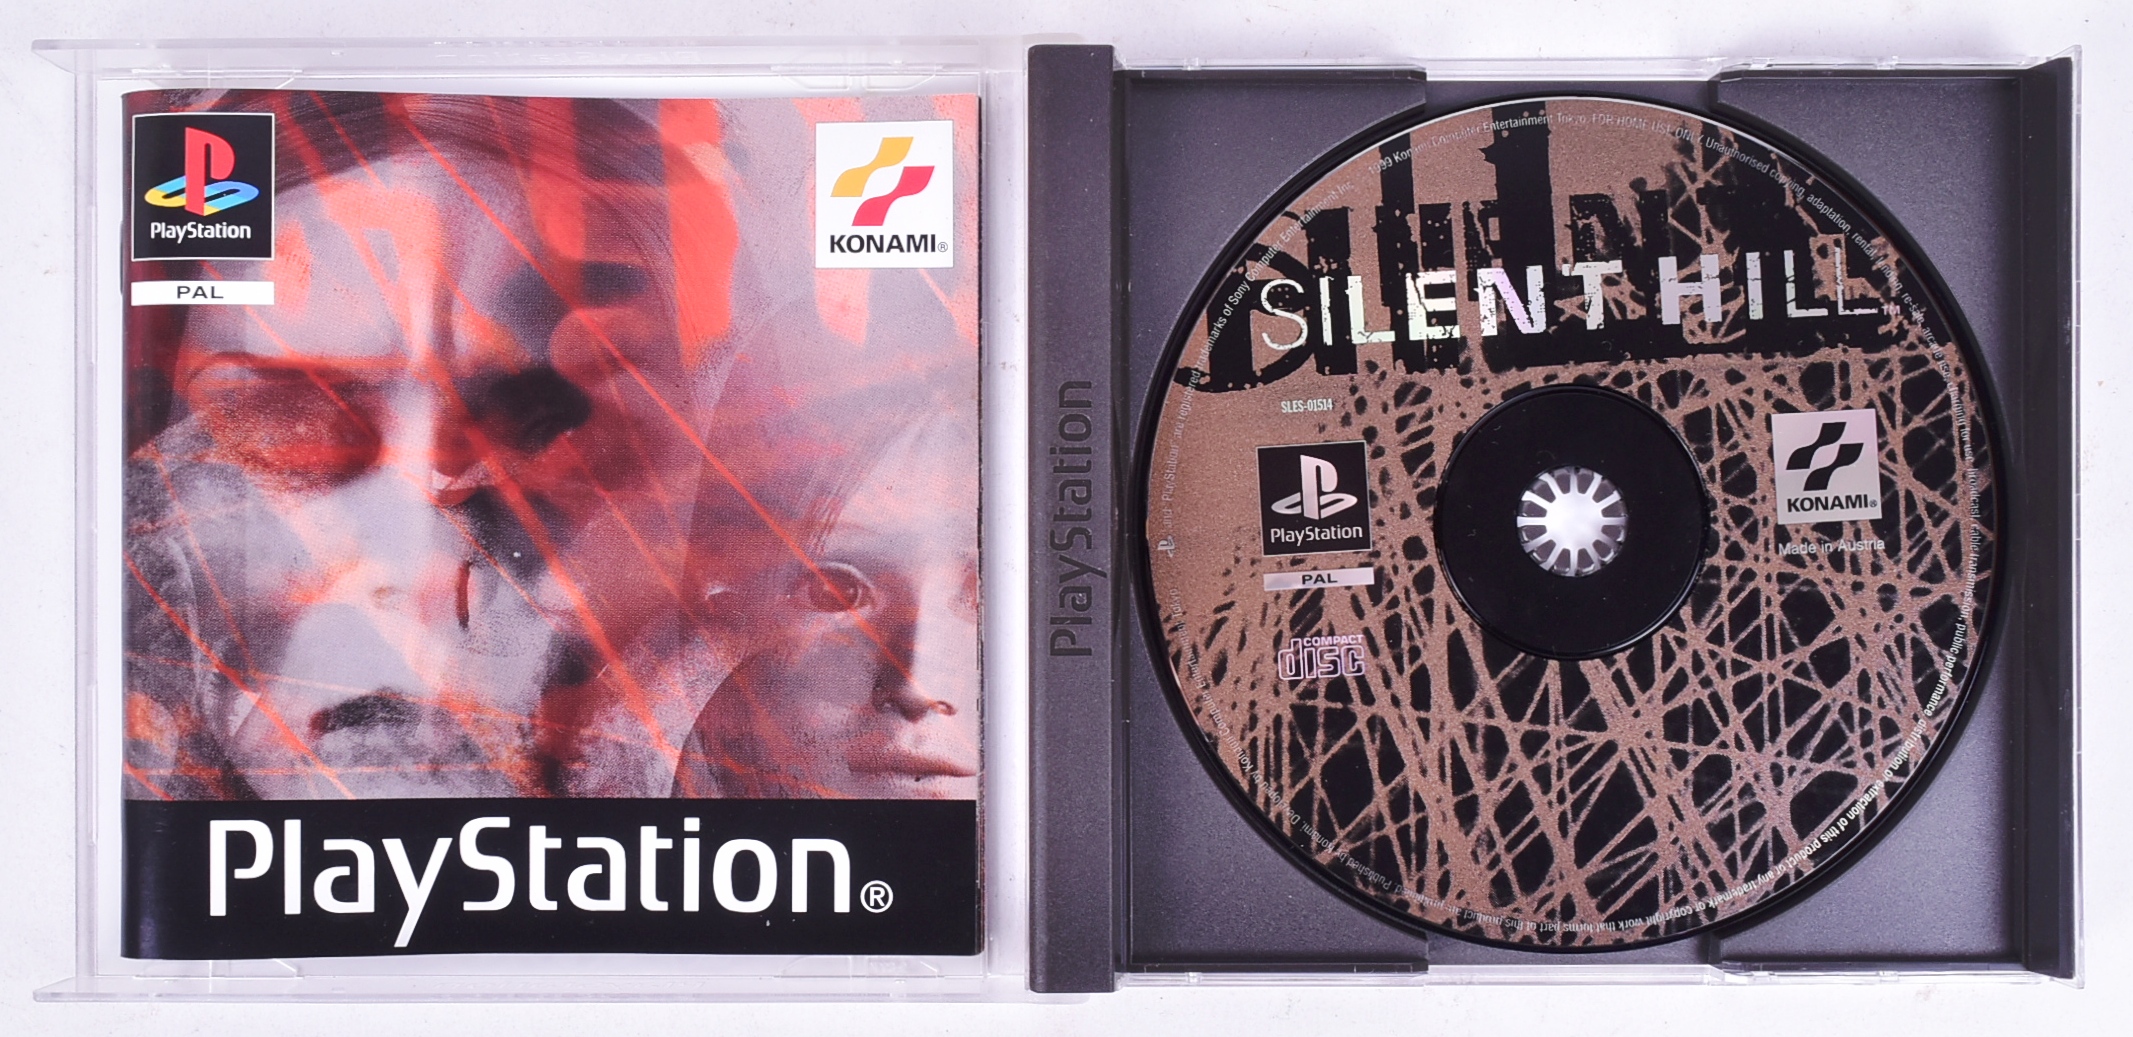 RETRO GAMING - PLAYSTATION ONE - SILENT HILL - Image 3 of 4